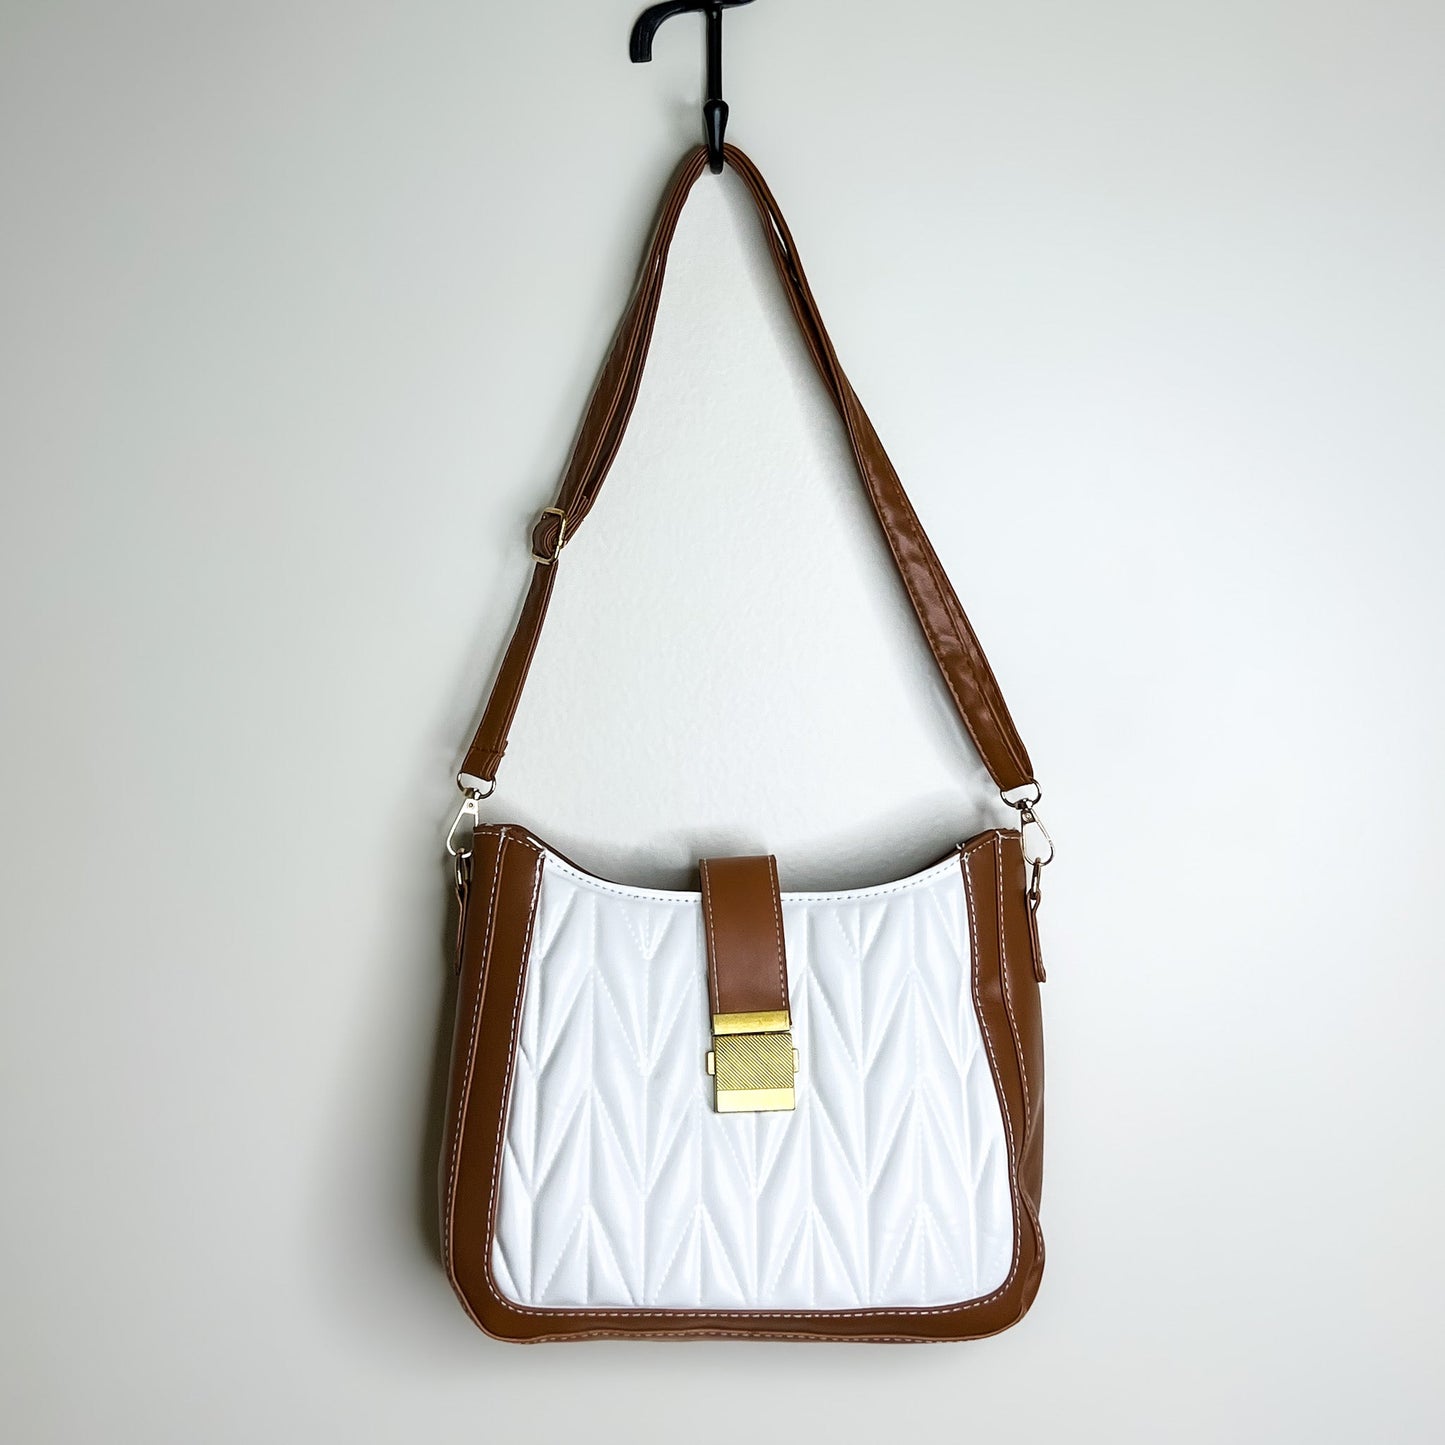 Californian Girl Hand Bag - The Accessorys Official